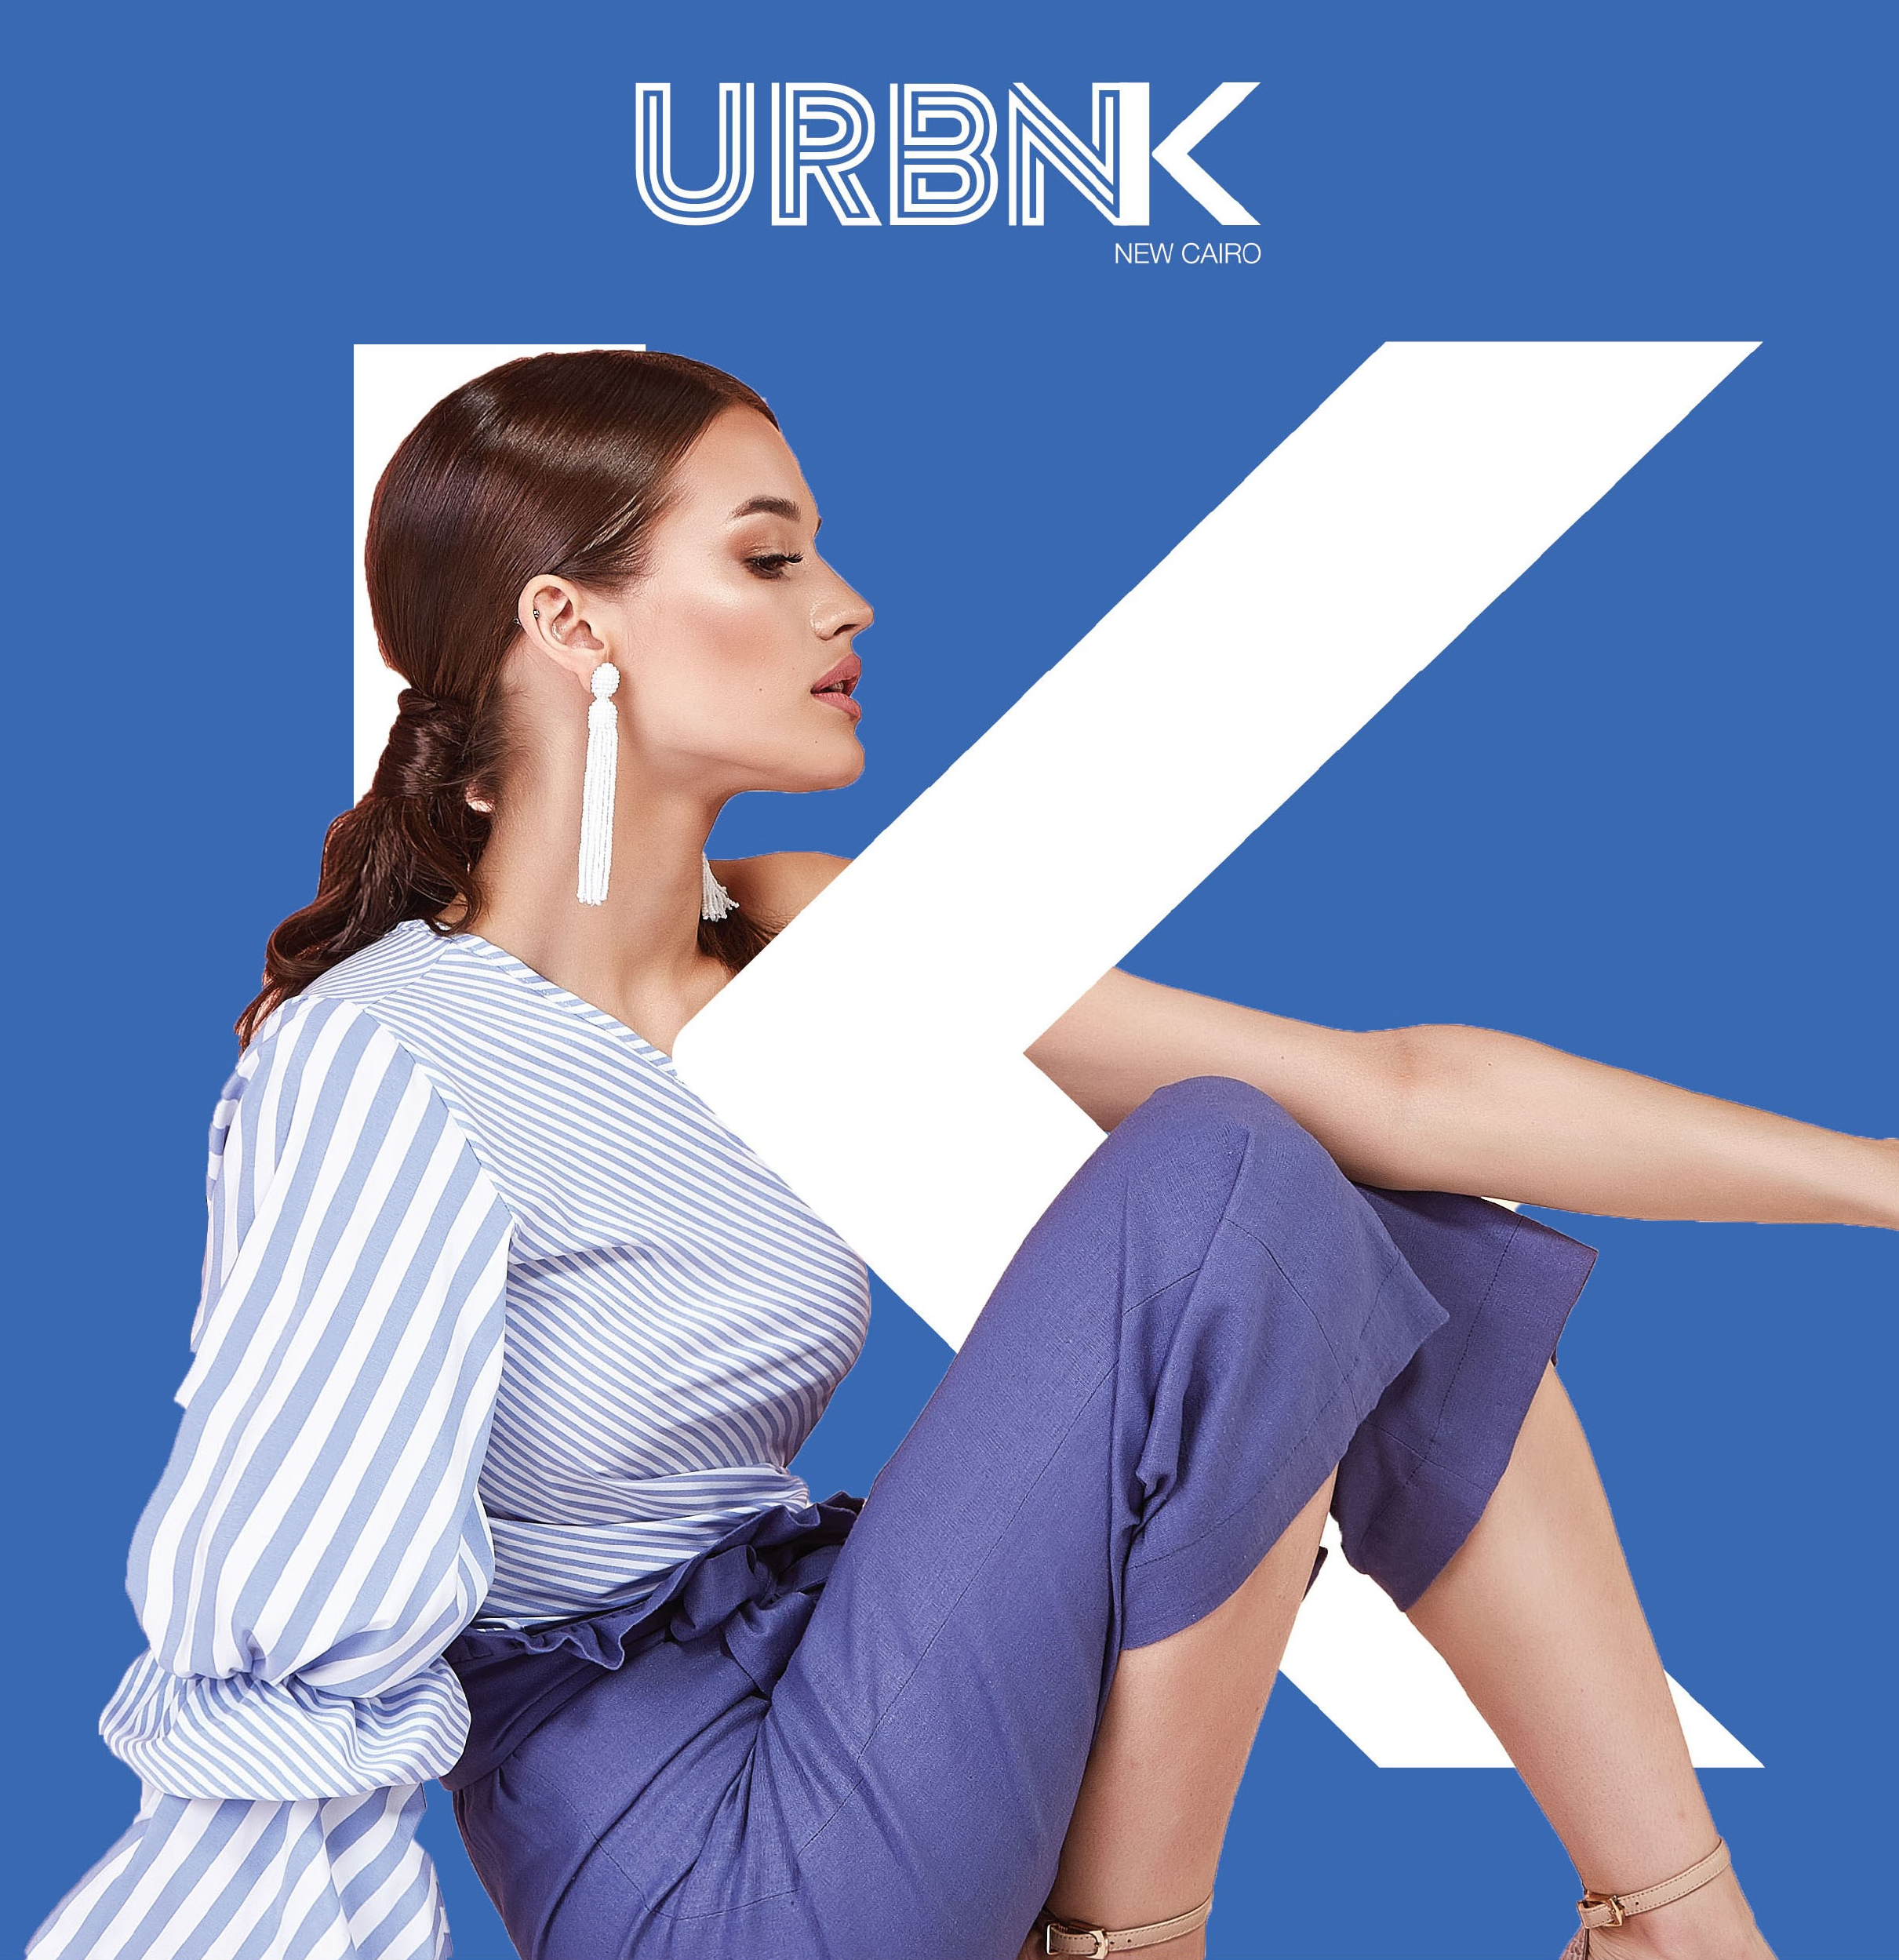 URBN K launches office spaces